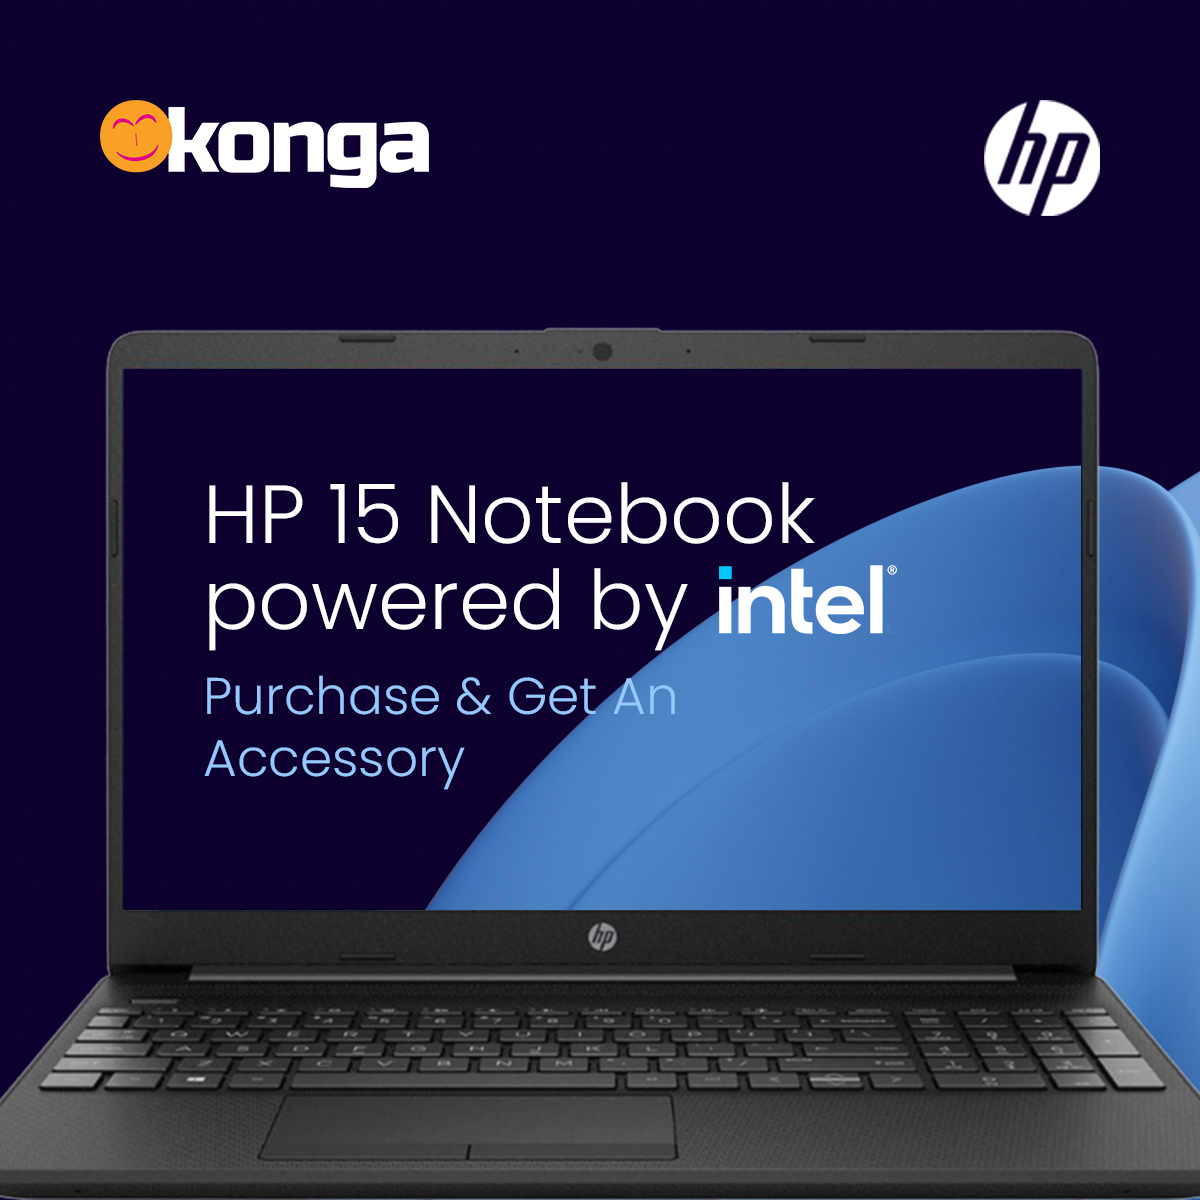 Exciting offer! 

Do more with unmatched speed and intelligence with Hp 15 Notebook.
****
Visit our website now: konga.com/search?search=… to get yours.
.
.
.
#intel #intellaptop #hplaptop #computersales #shopkonga #marketplace #computervillage